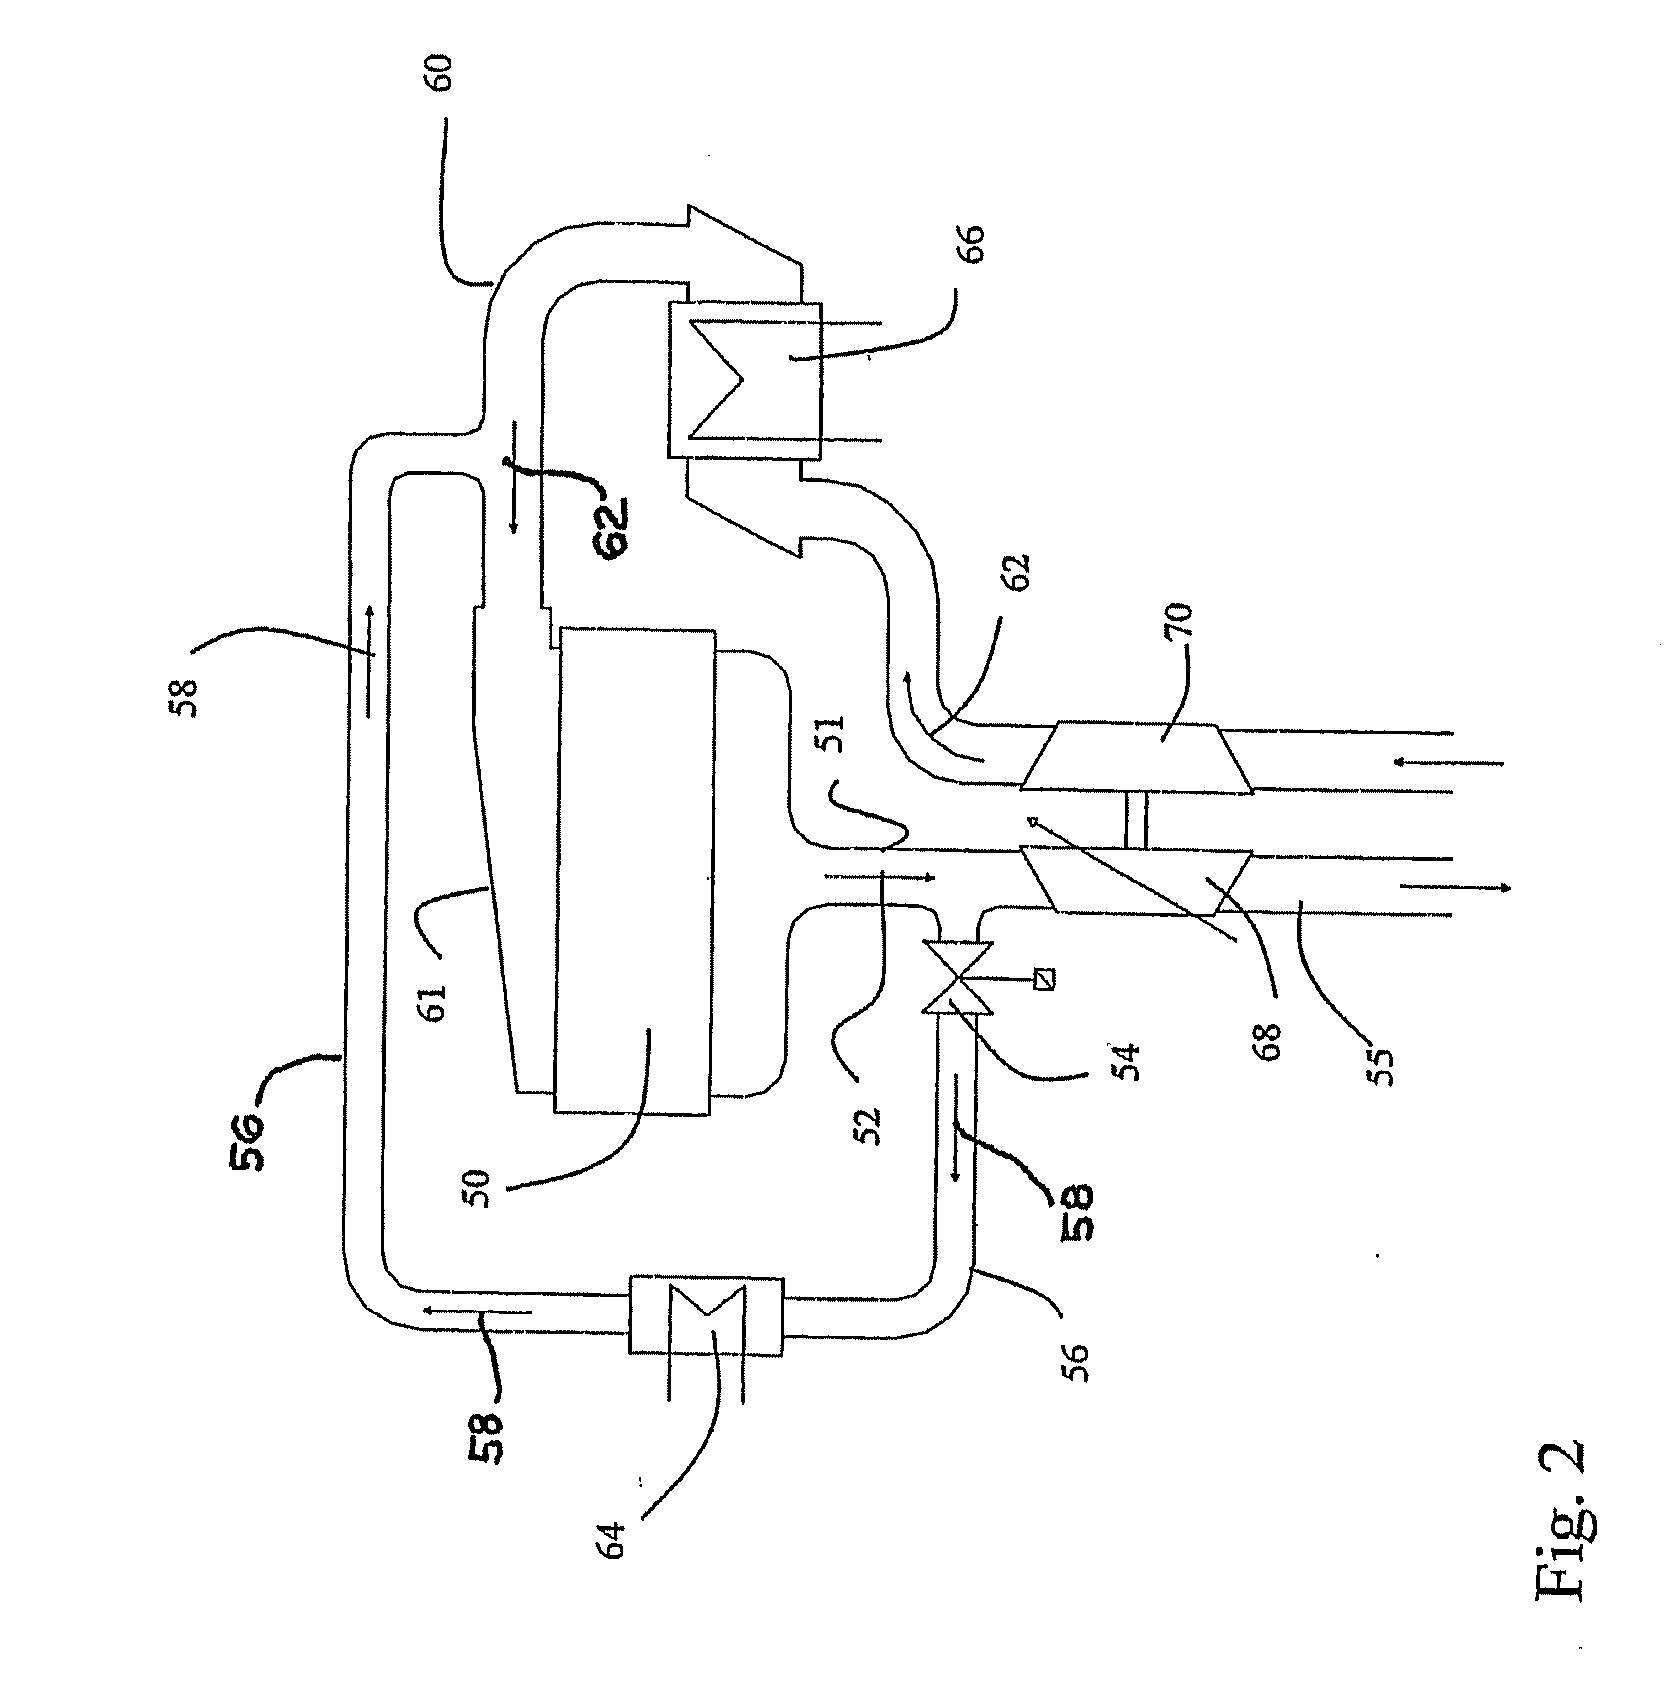 Method and apparatus for providing for high EGR gaseous-fuelled direct injection internal combustion engine